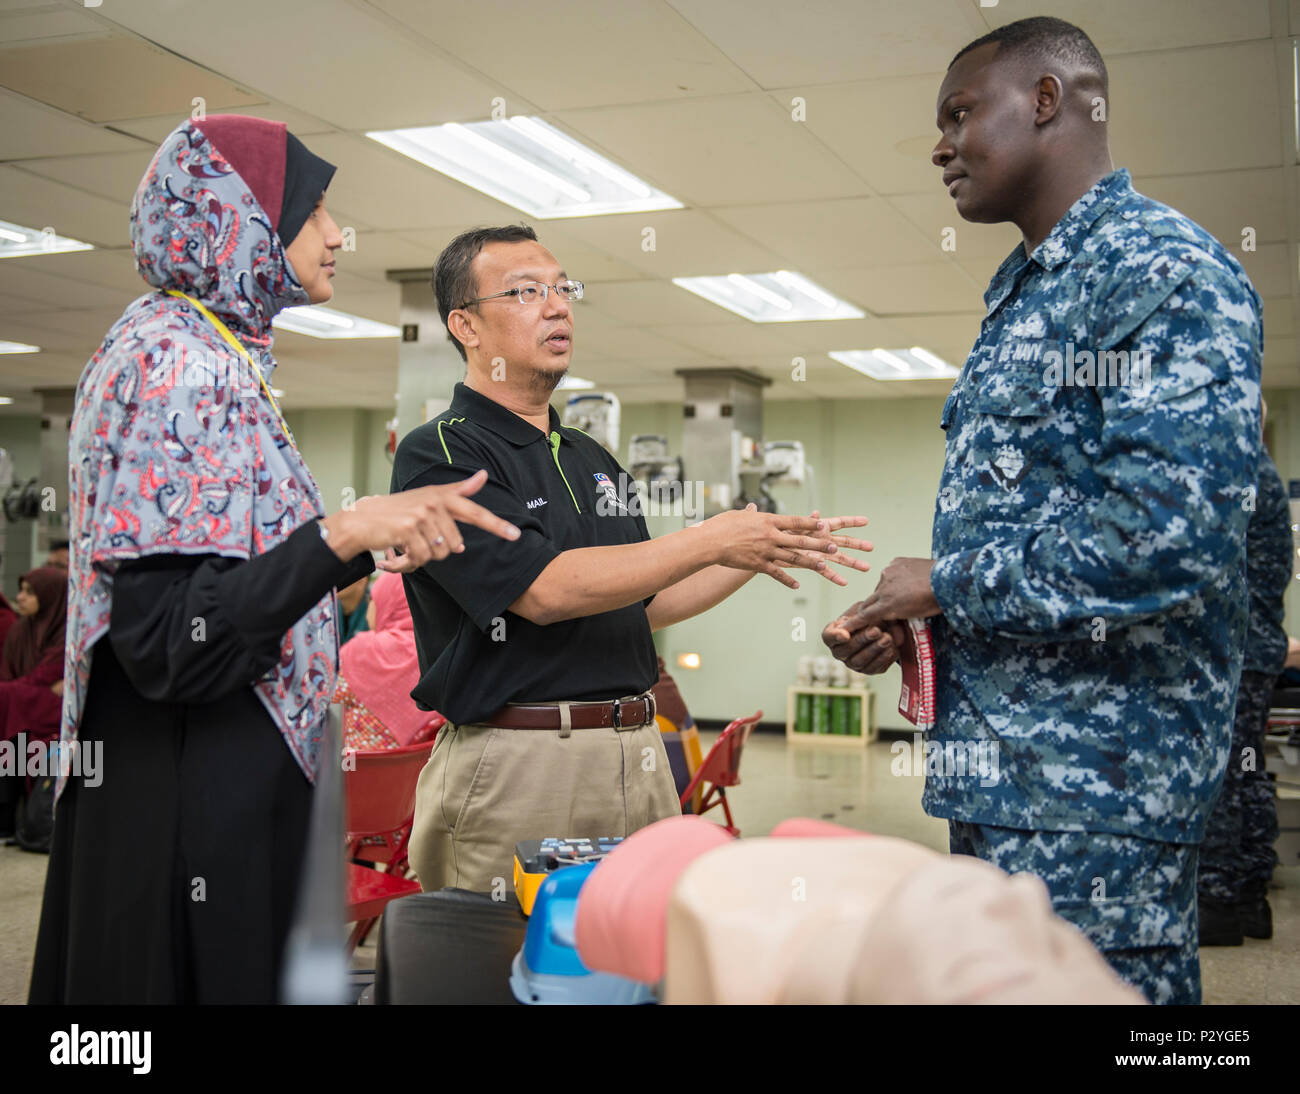 160809-N-QW941-060 KUANTAN, Malaysia (Aug. 9, 2016) Hospital Corpsman 2nd Class Harrison Mwanzi (right), a native of San Diego, assigned to hospital ship USNS Mercy (T-AH 19), speaks with Malaysian doctors prior to a Pacific Partnership 2016 advanced cardiovascular life support training course aboard Mercy. During the training, Pacific Partnership 2016 personnel and Malaysian doctors discussed guidelines for treating patients with cardiac arrest and other life threatening emergencies. This is the first time Mercy and Pacific Partnership have visited Malaysia. During the mission stop partner na Stock Photo